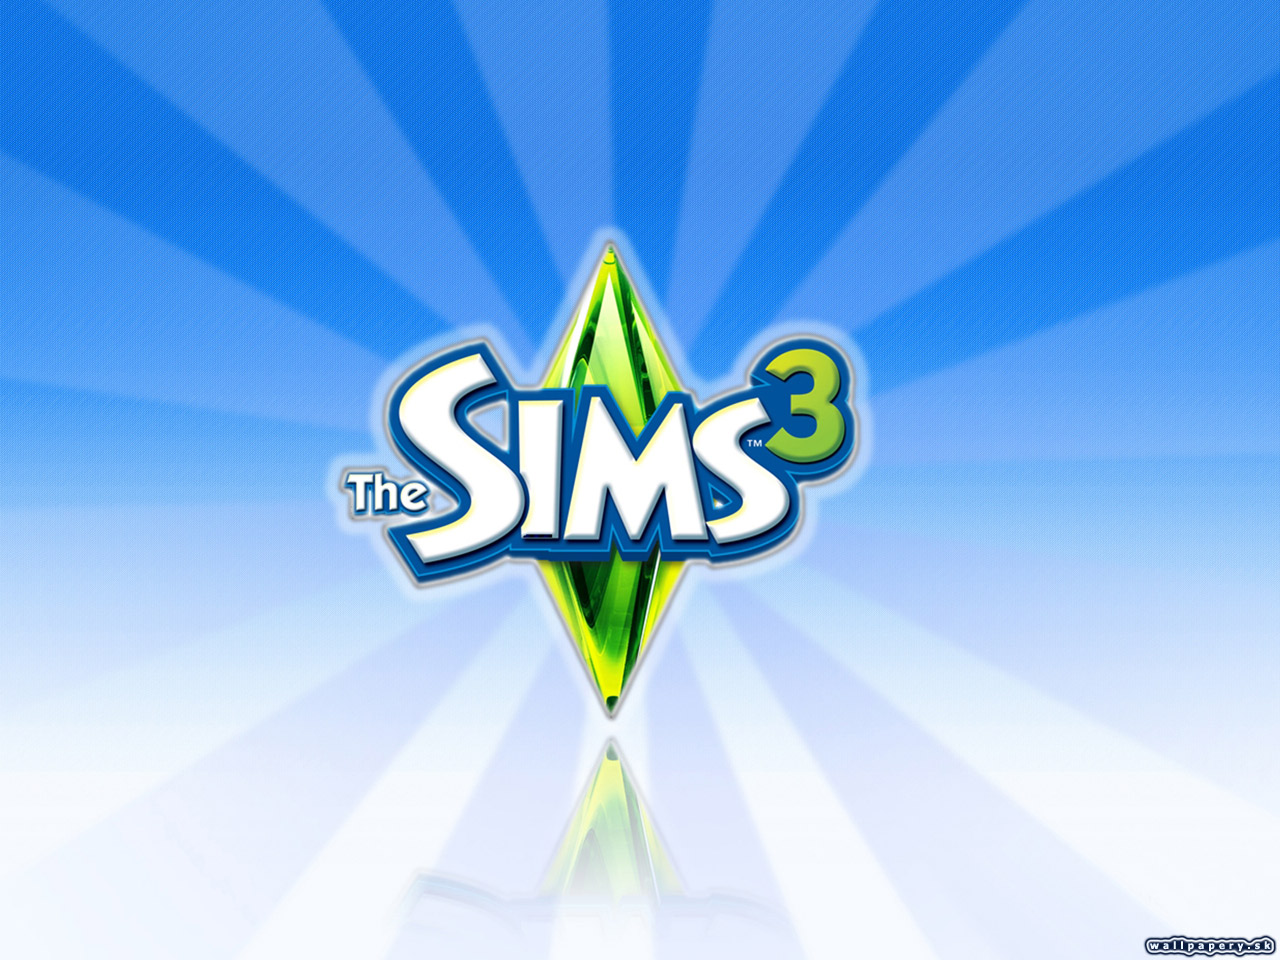 The Sims 3 - wallpaper 7